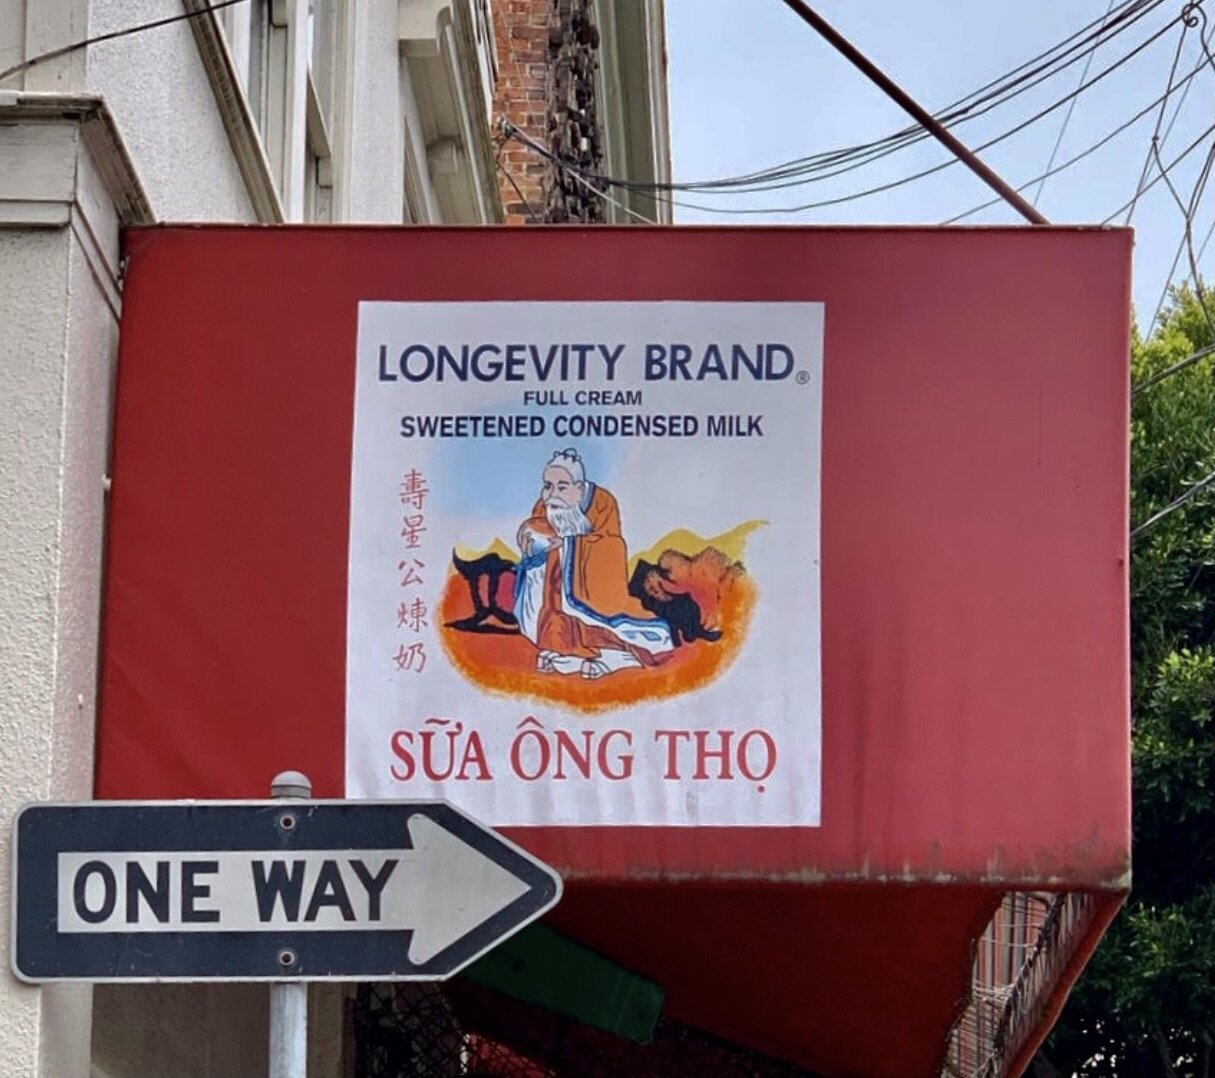 They also told us that Longevity Brand was THE best condensed milk.  Then, Mitch saw this.